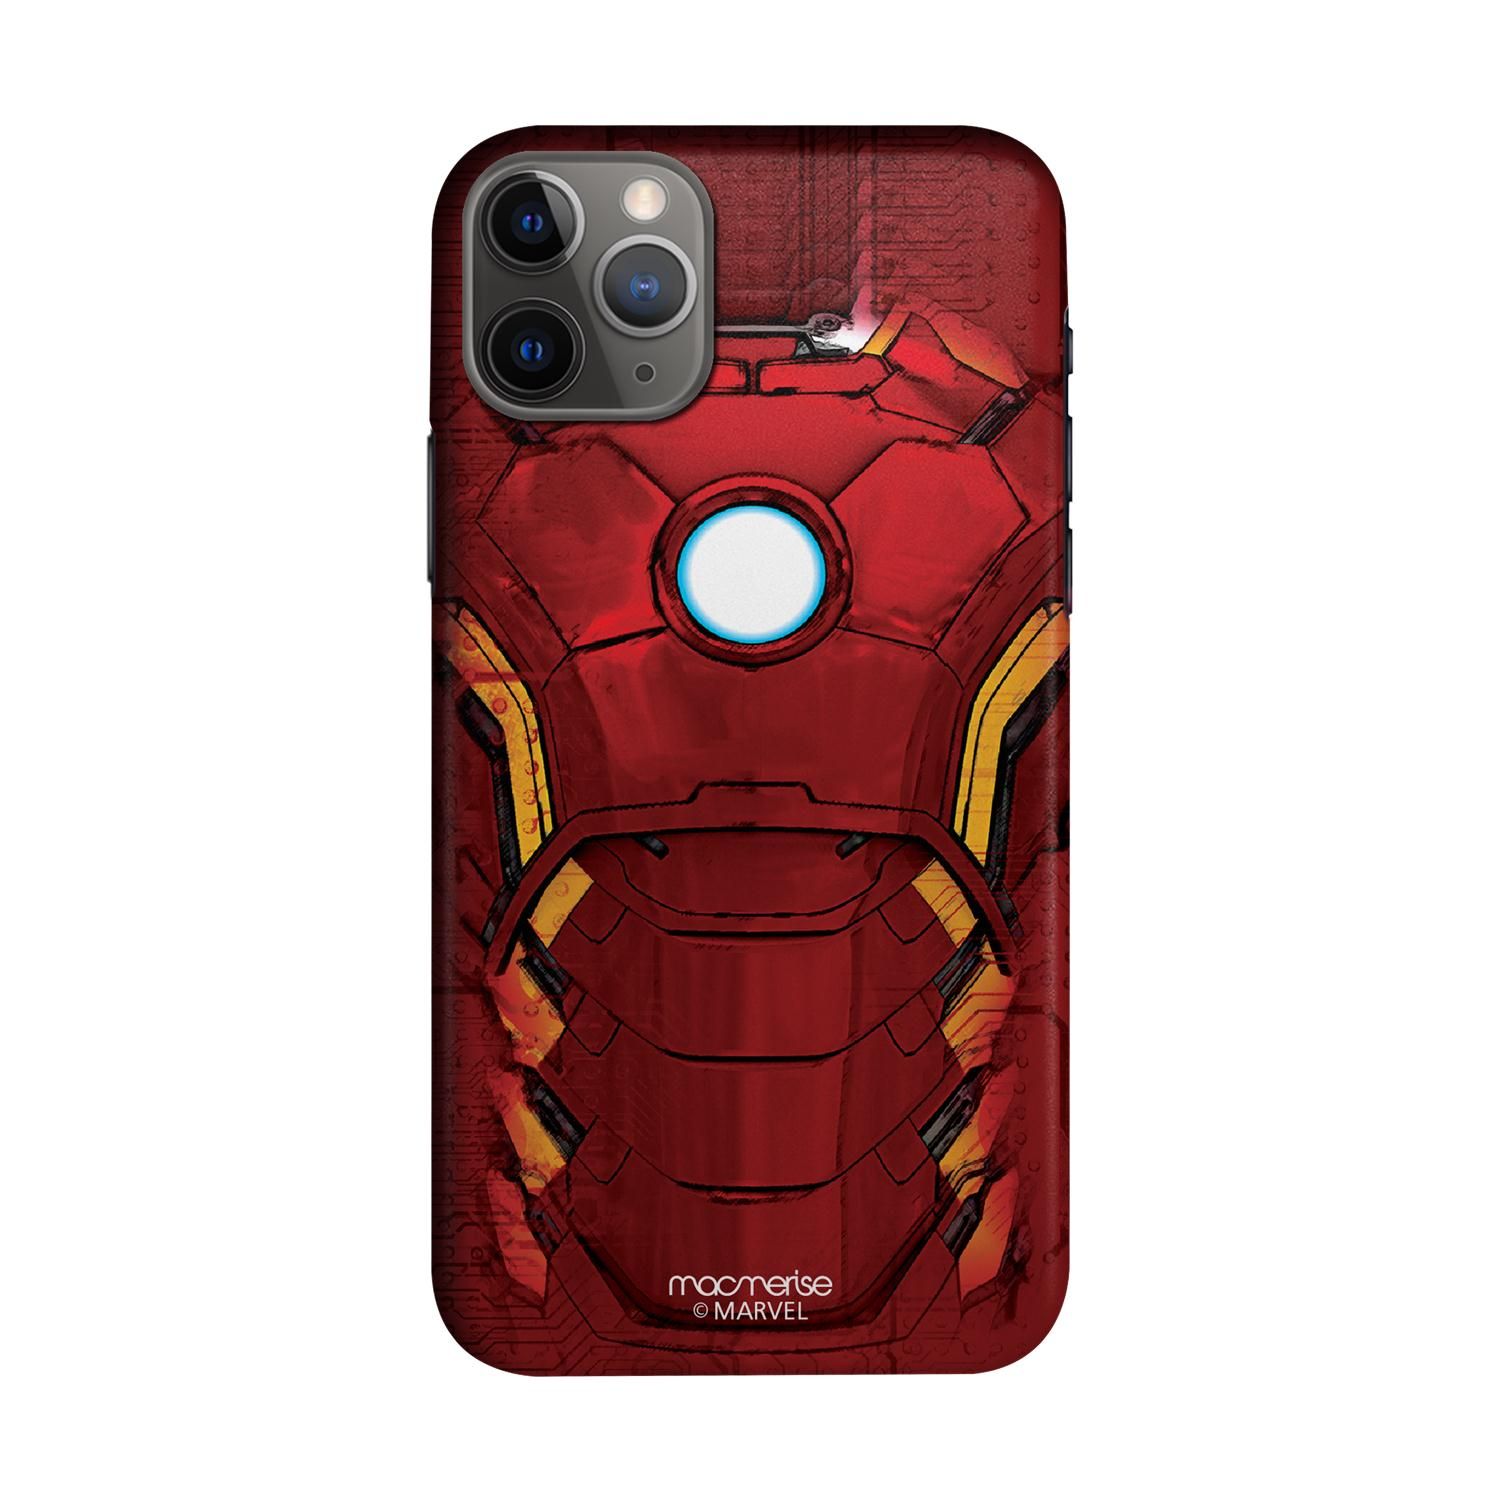 Buy Suit of Armour - Sleek Phone Case for iPhone 11 Pro Online